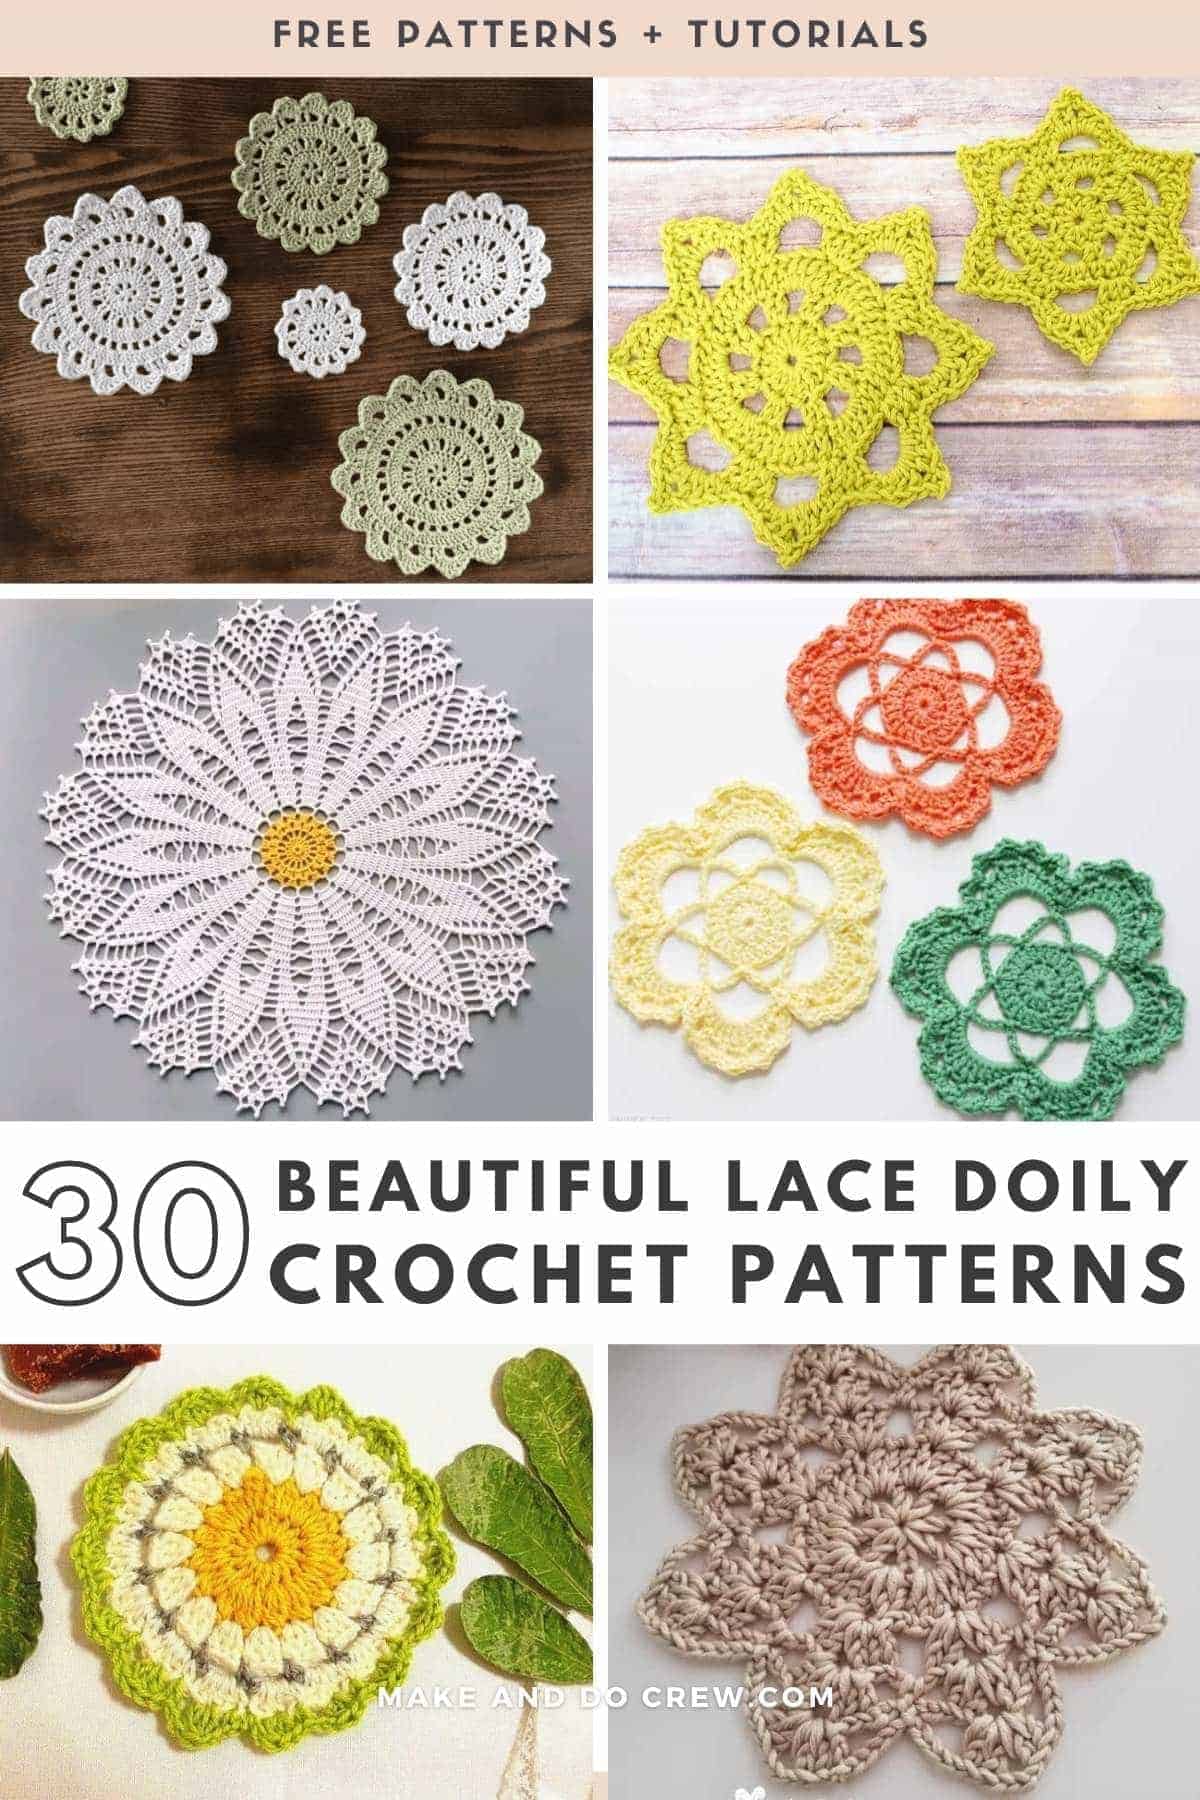 A collage of six photos of different crochet doilies. Six round crochet doilies in colors white and green and in different sizes. A yellow green crochet doily in a star shape. A daisy-like lace crochet doily in white and yellow colors. Flower shaped crochet doilies in colors orange, yellow and green. A round chunky crochet doily in colors lime green, light yellow and bright yellow. A taupe colored flower shaped doily.